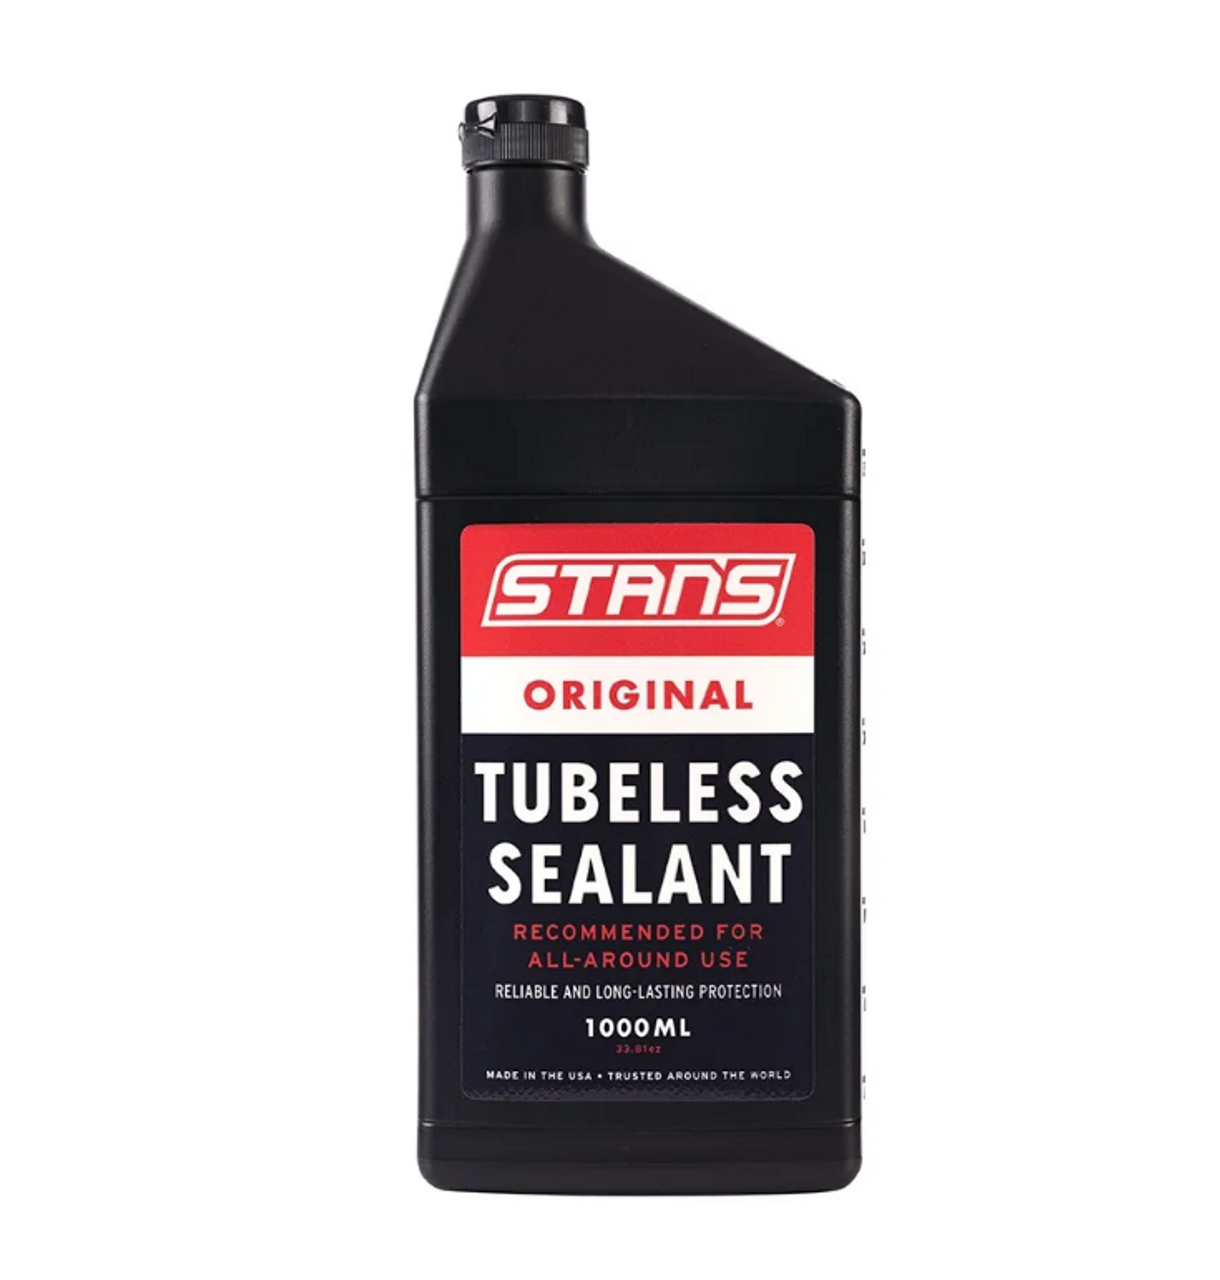 Stan's No Tubes Tubular / Tubeless Tyre  Puncture Sealant All Sizes